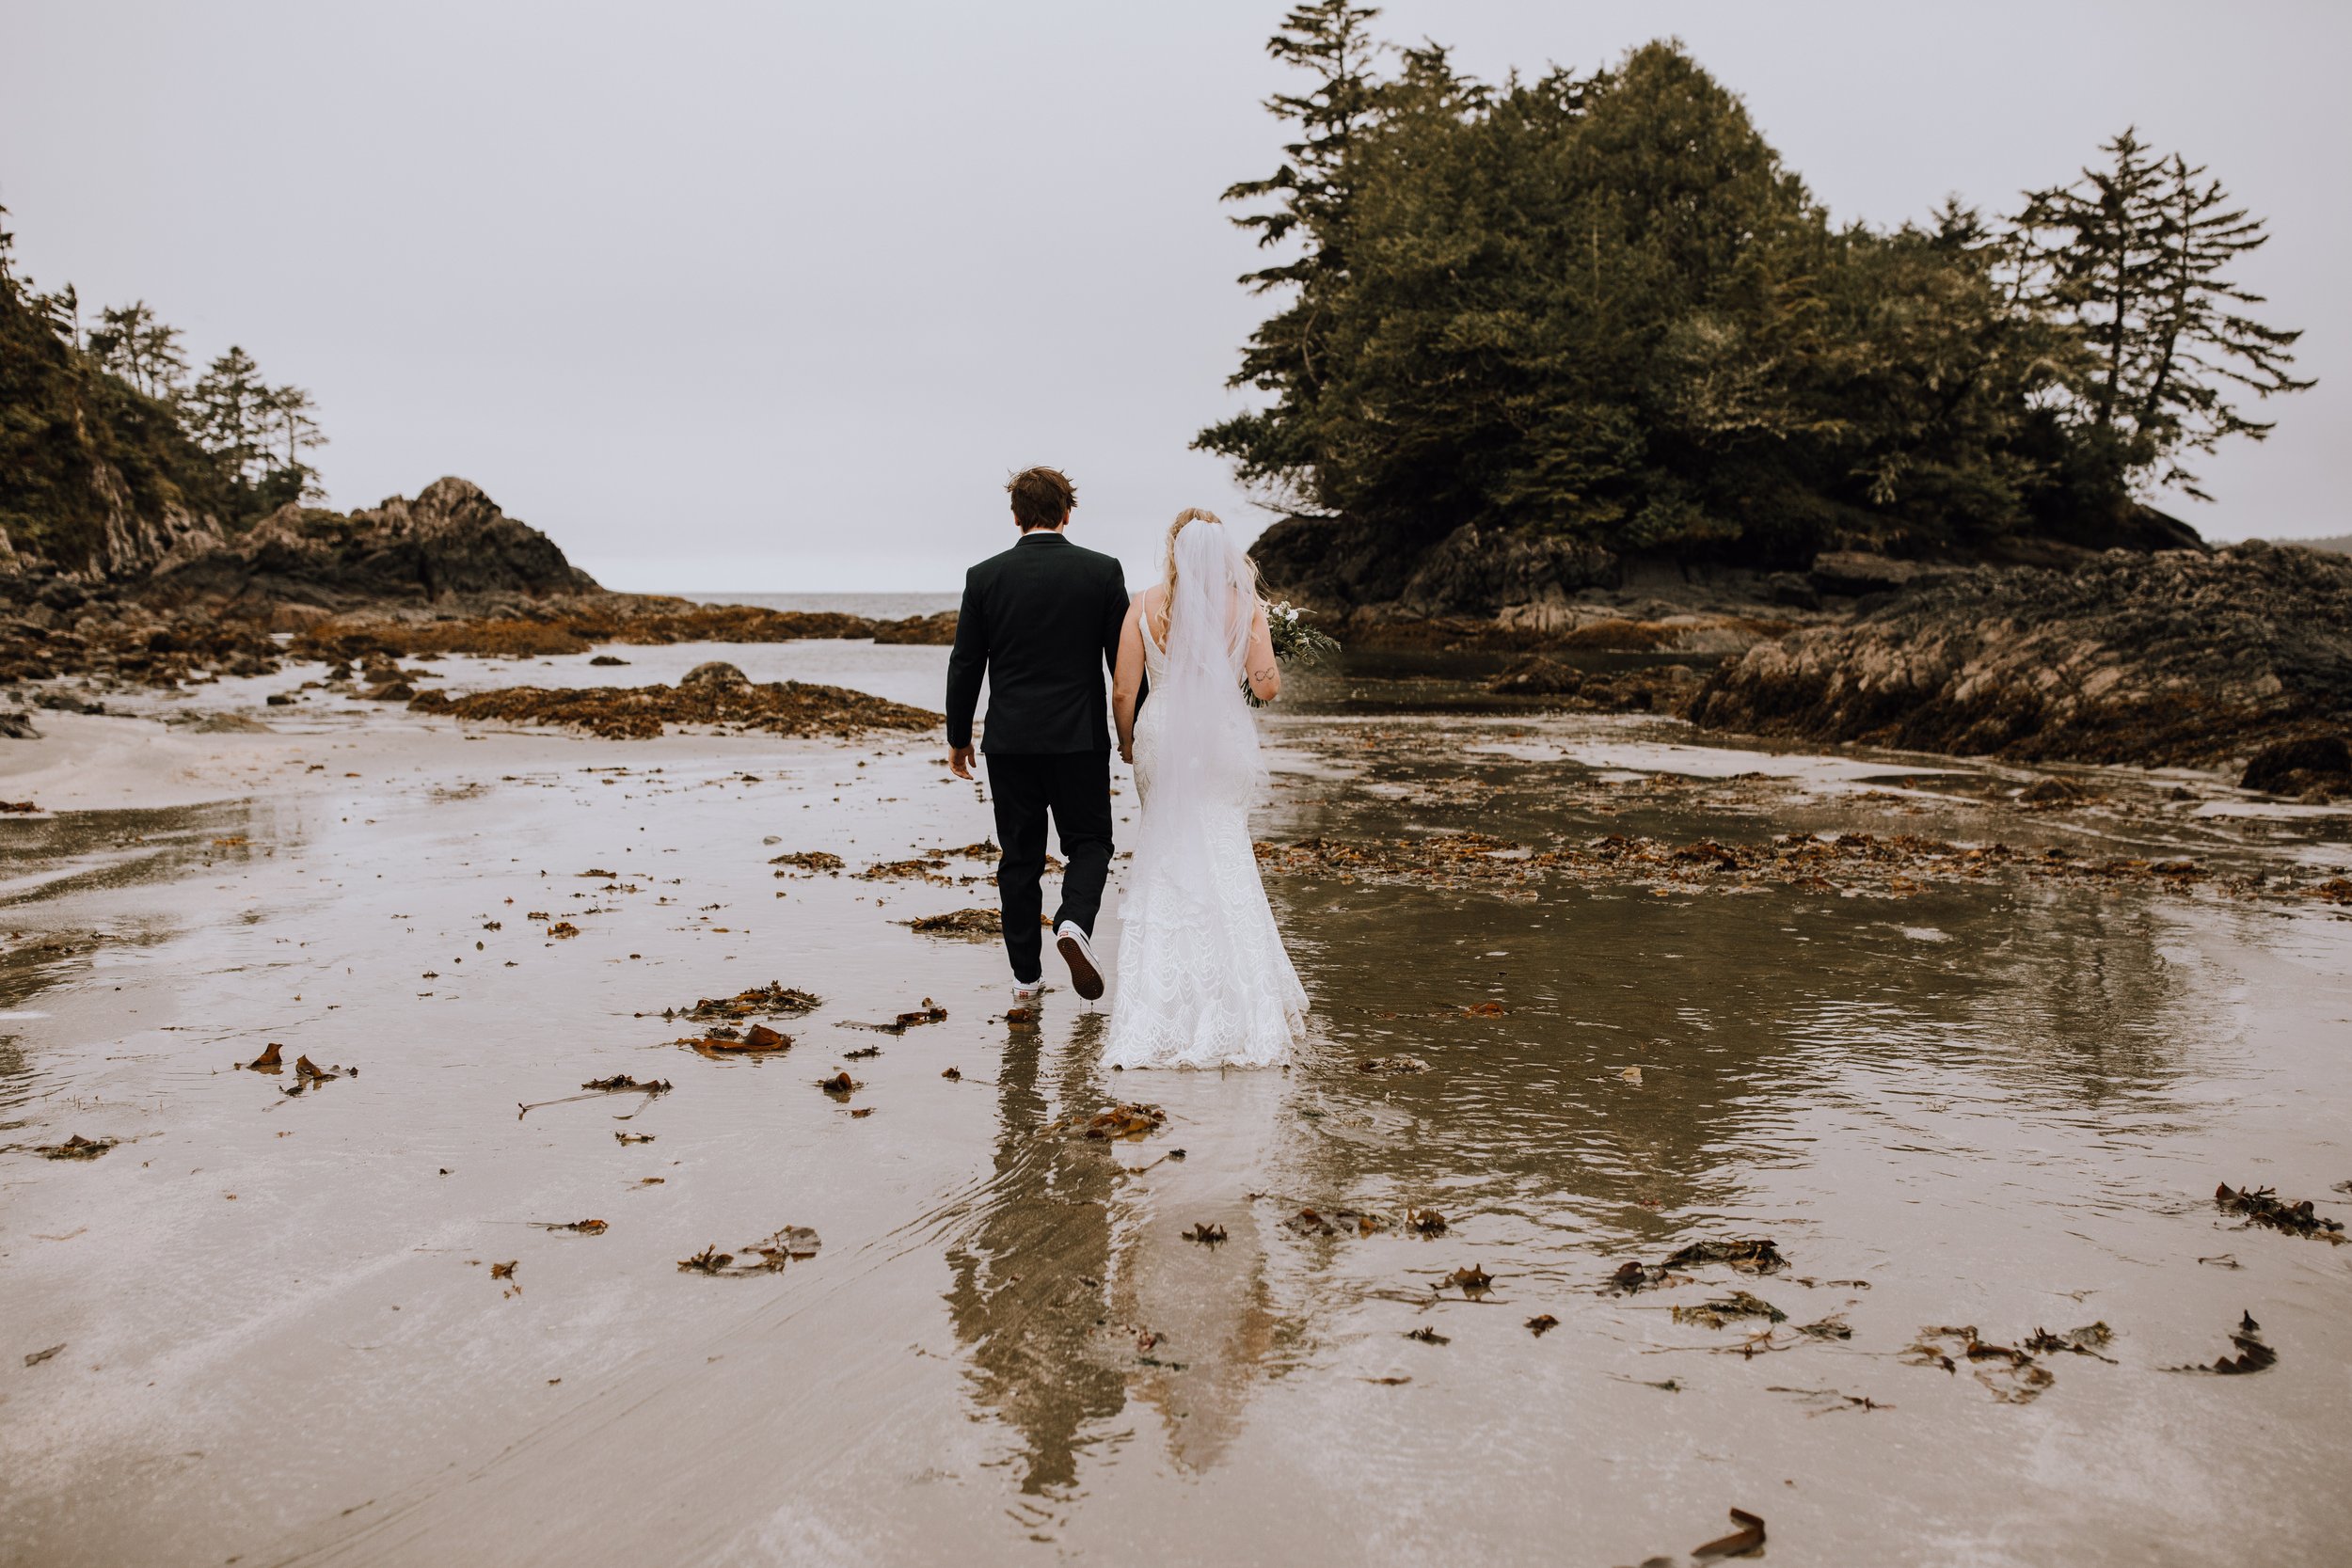 Brooke and Devin Wedding - Tin Wis Best Western Tofino Vancouver Island British Columbia - Elyse Anna Photography-3900.jpg